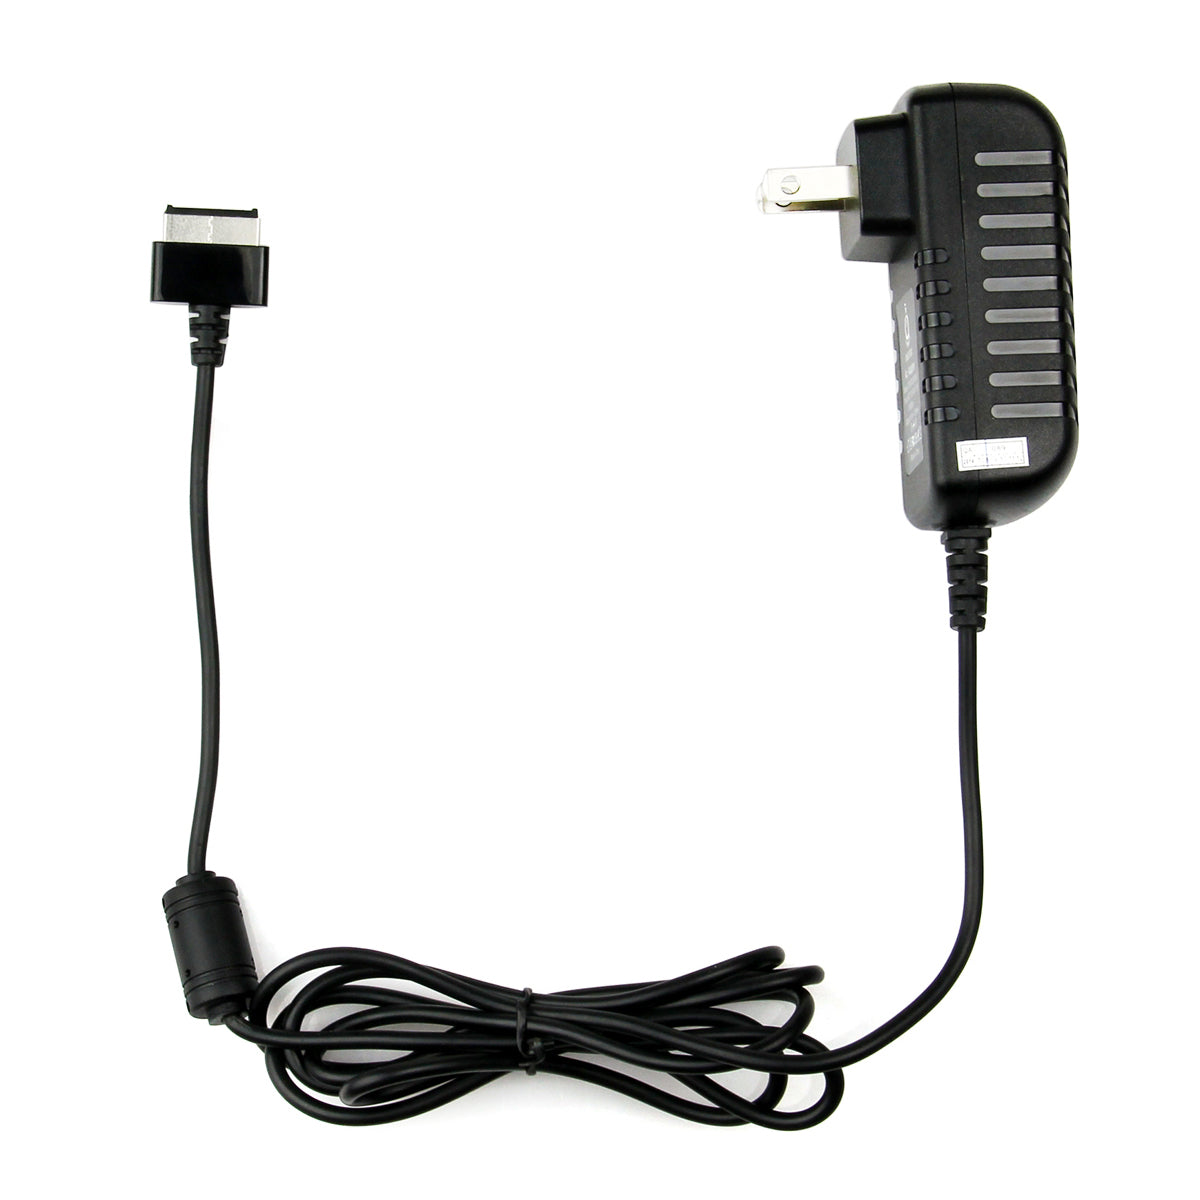 AC Adapter Charger for ASUS TF101 B1 Tablet.